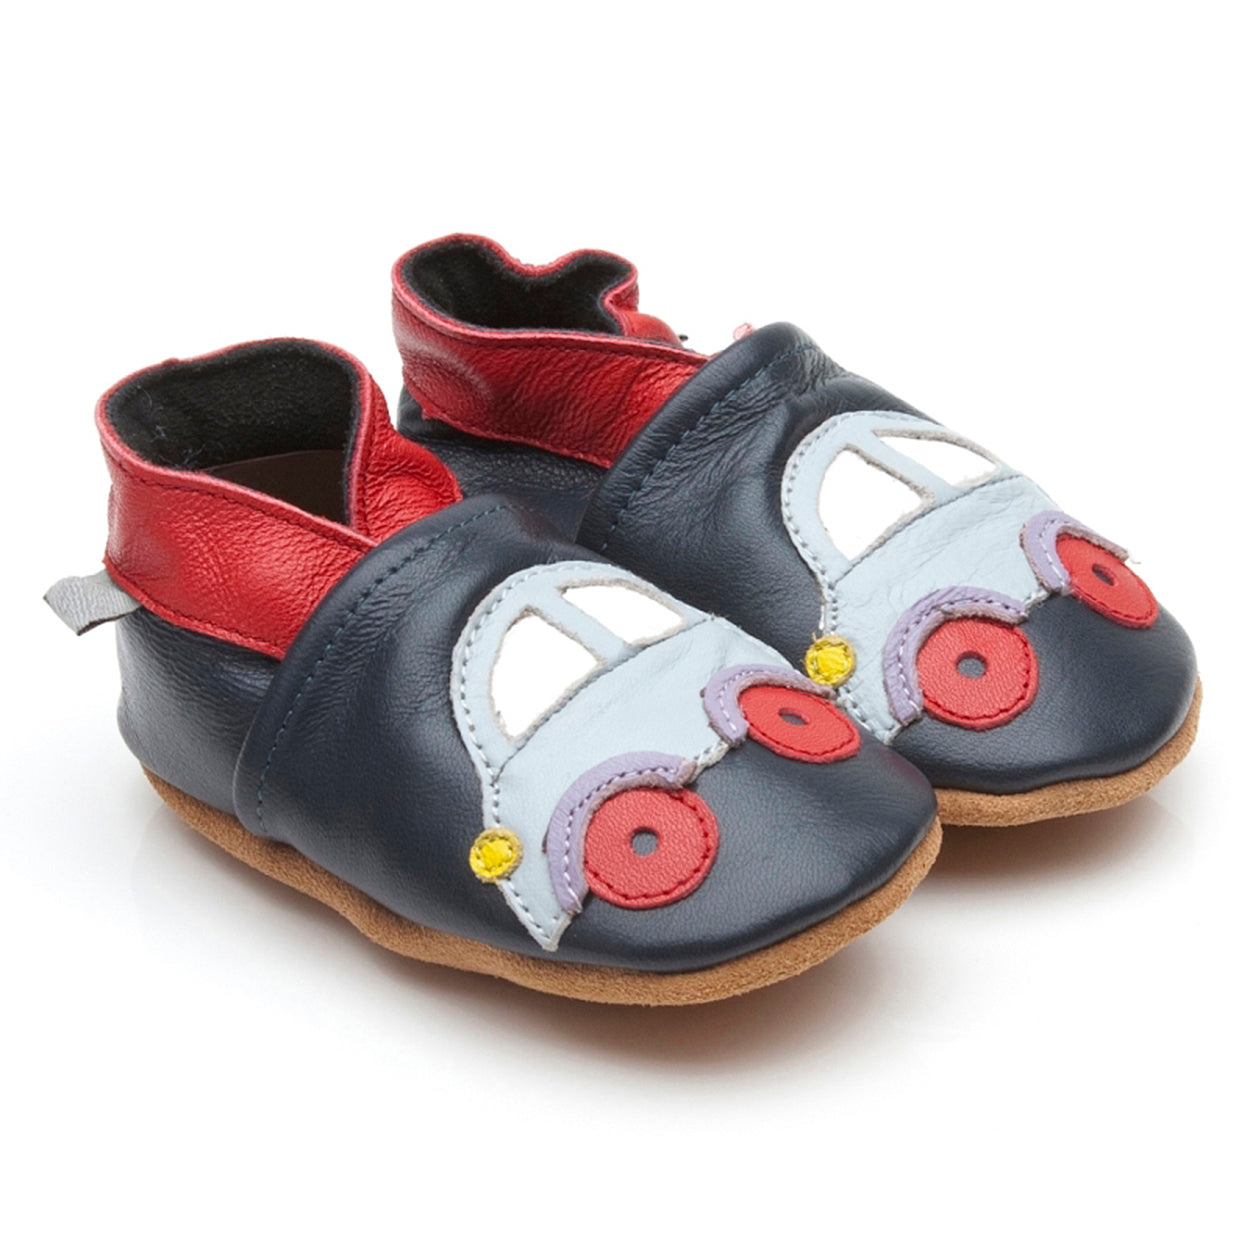 Soft Leather Baby Shoes Car